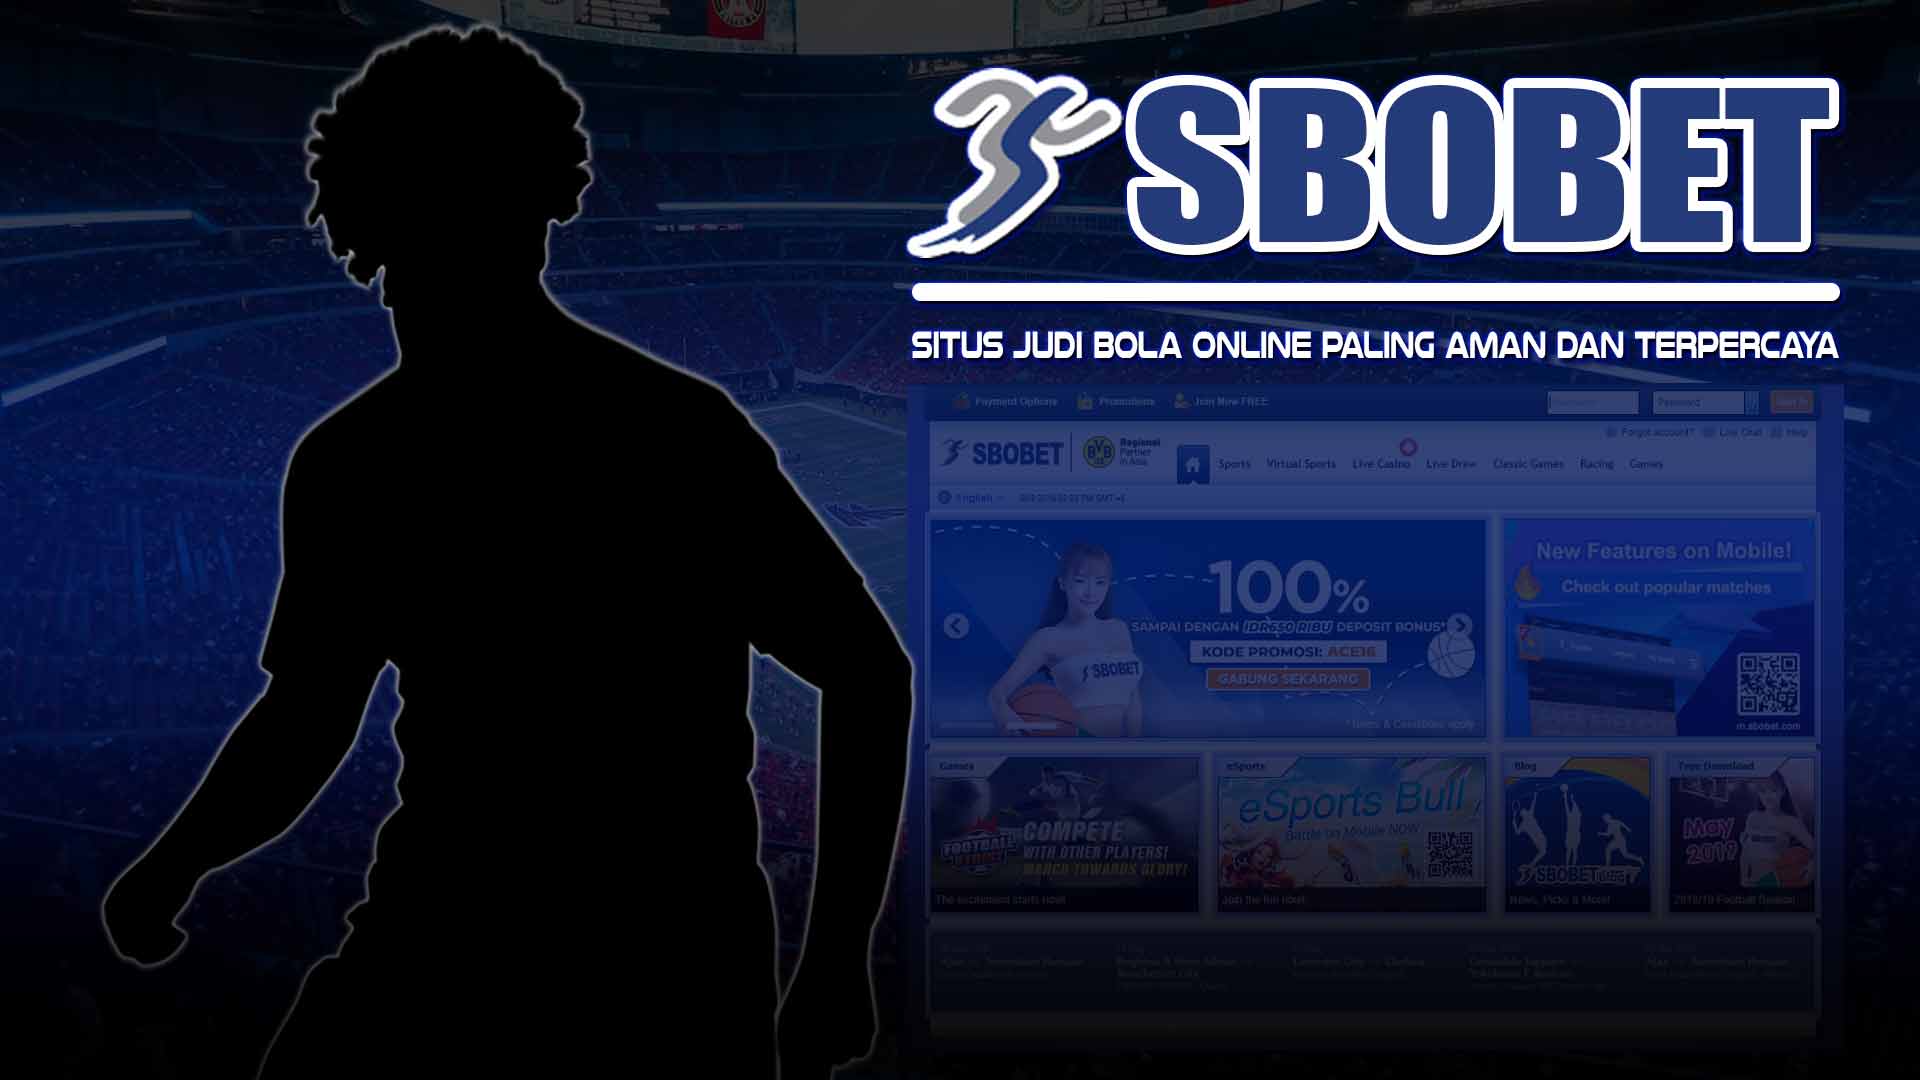 The sbobet program will provide you with all of the back-up doubt to build the wagers you desire post thumbnail image